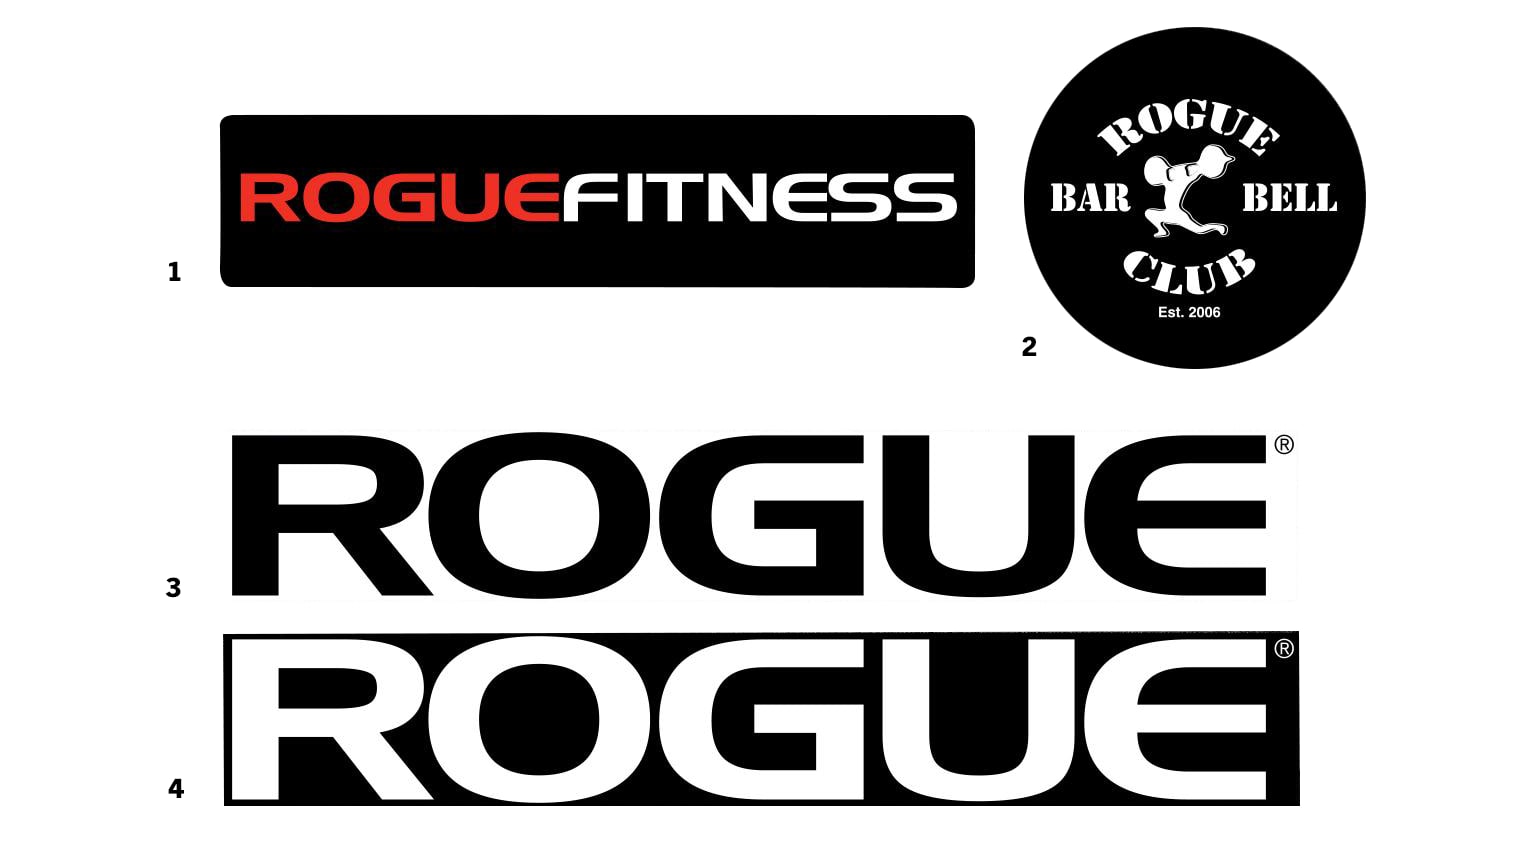 CrossFit Double-up Sticker Sheet – The Official Online CrossFit Store